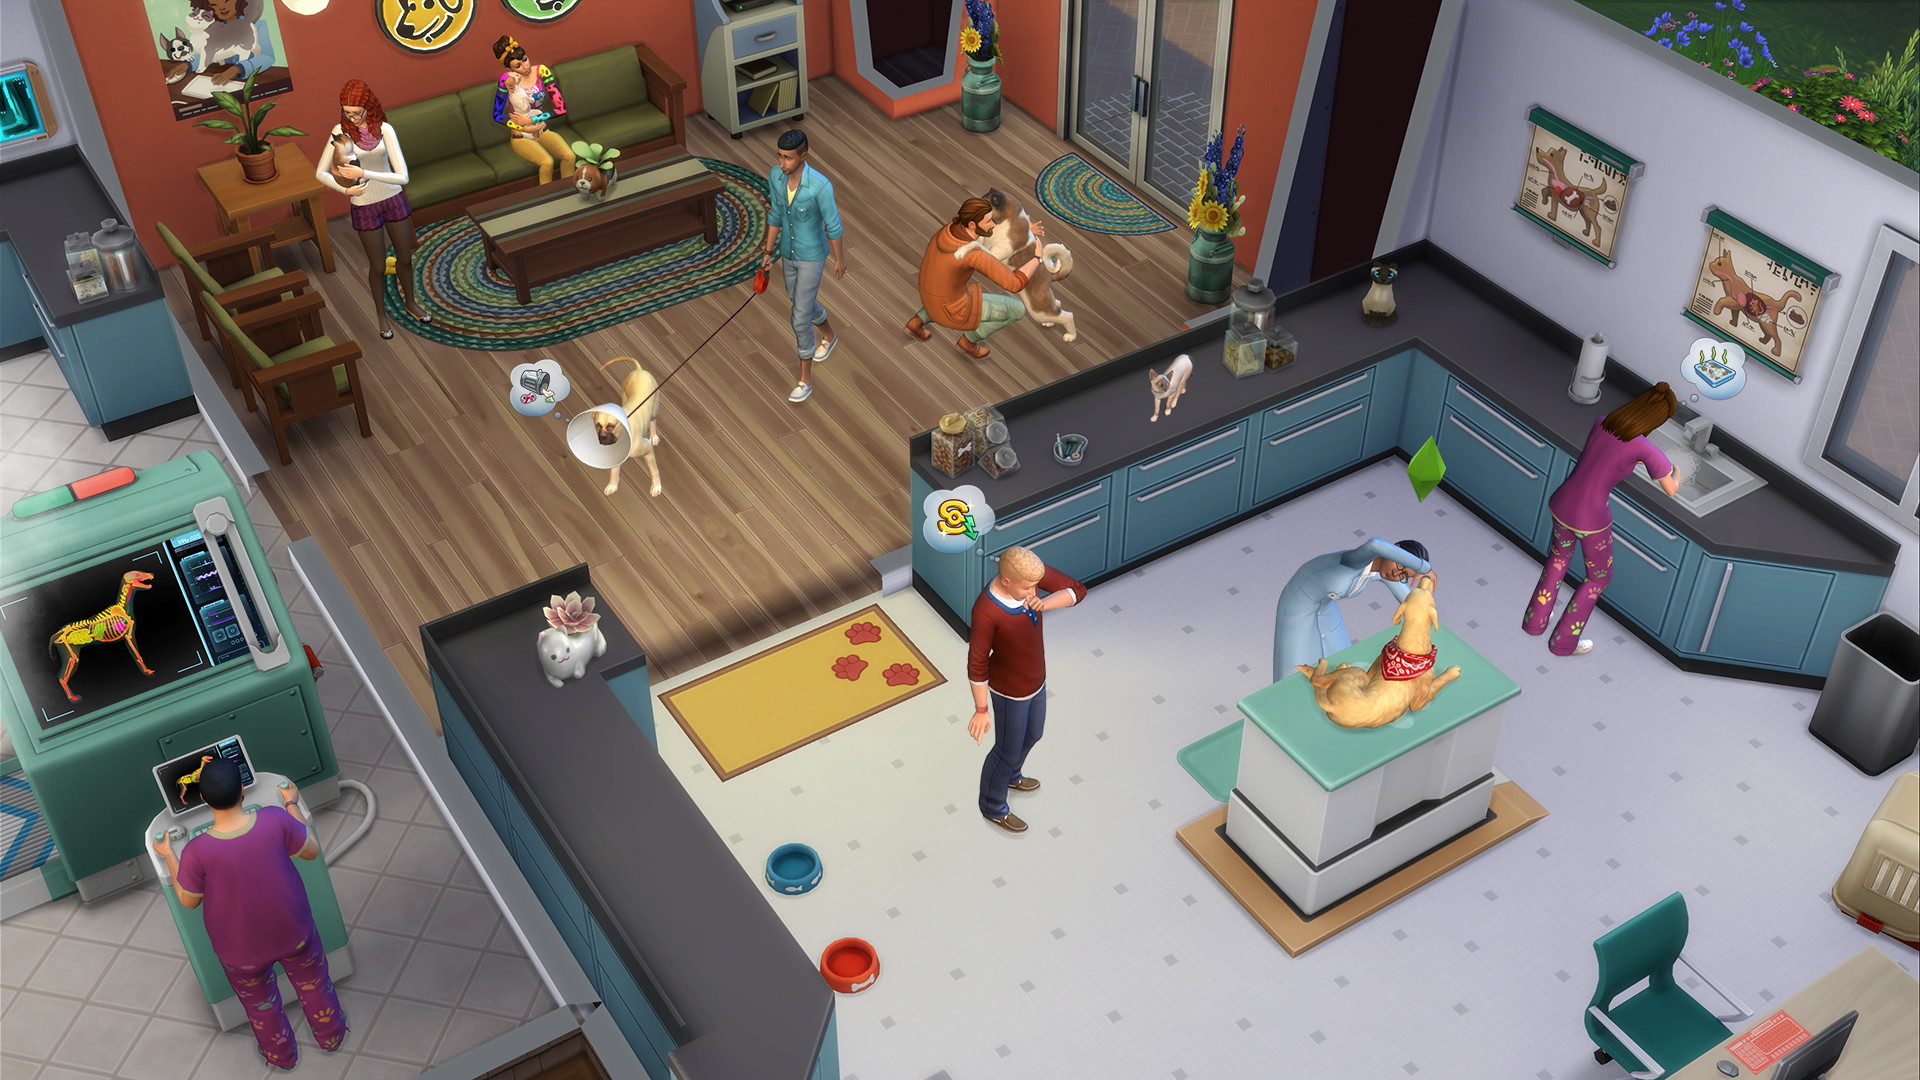 The Sims 4: Cats & Dogs - screenshot 2